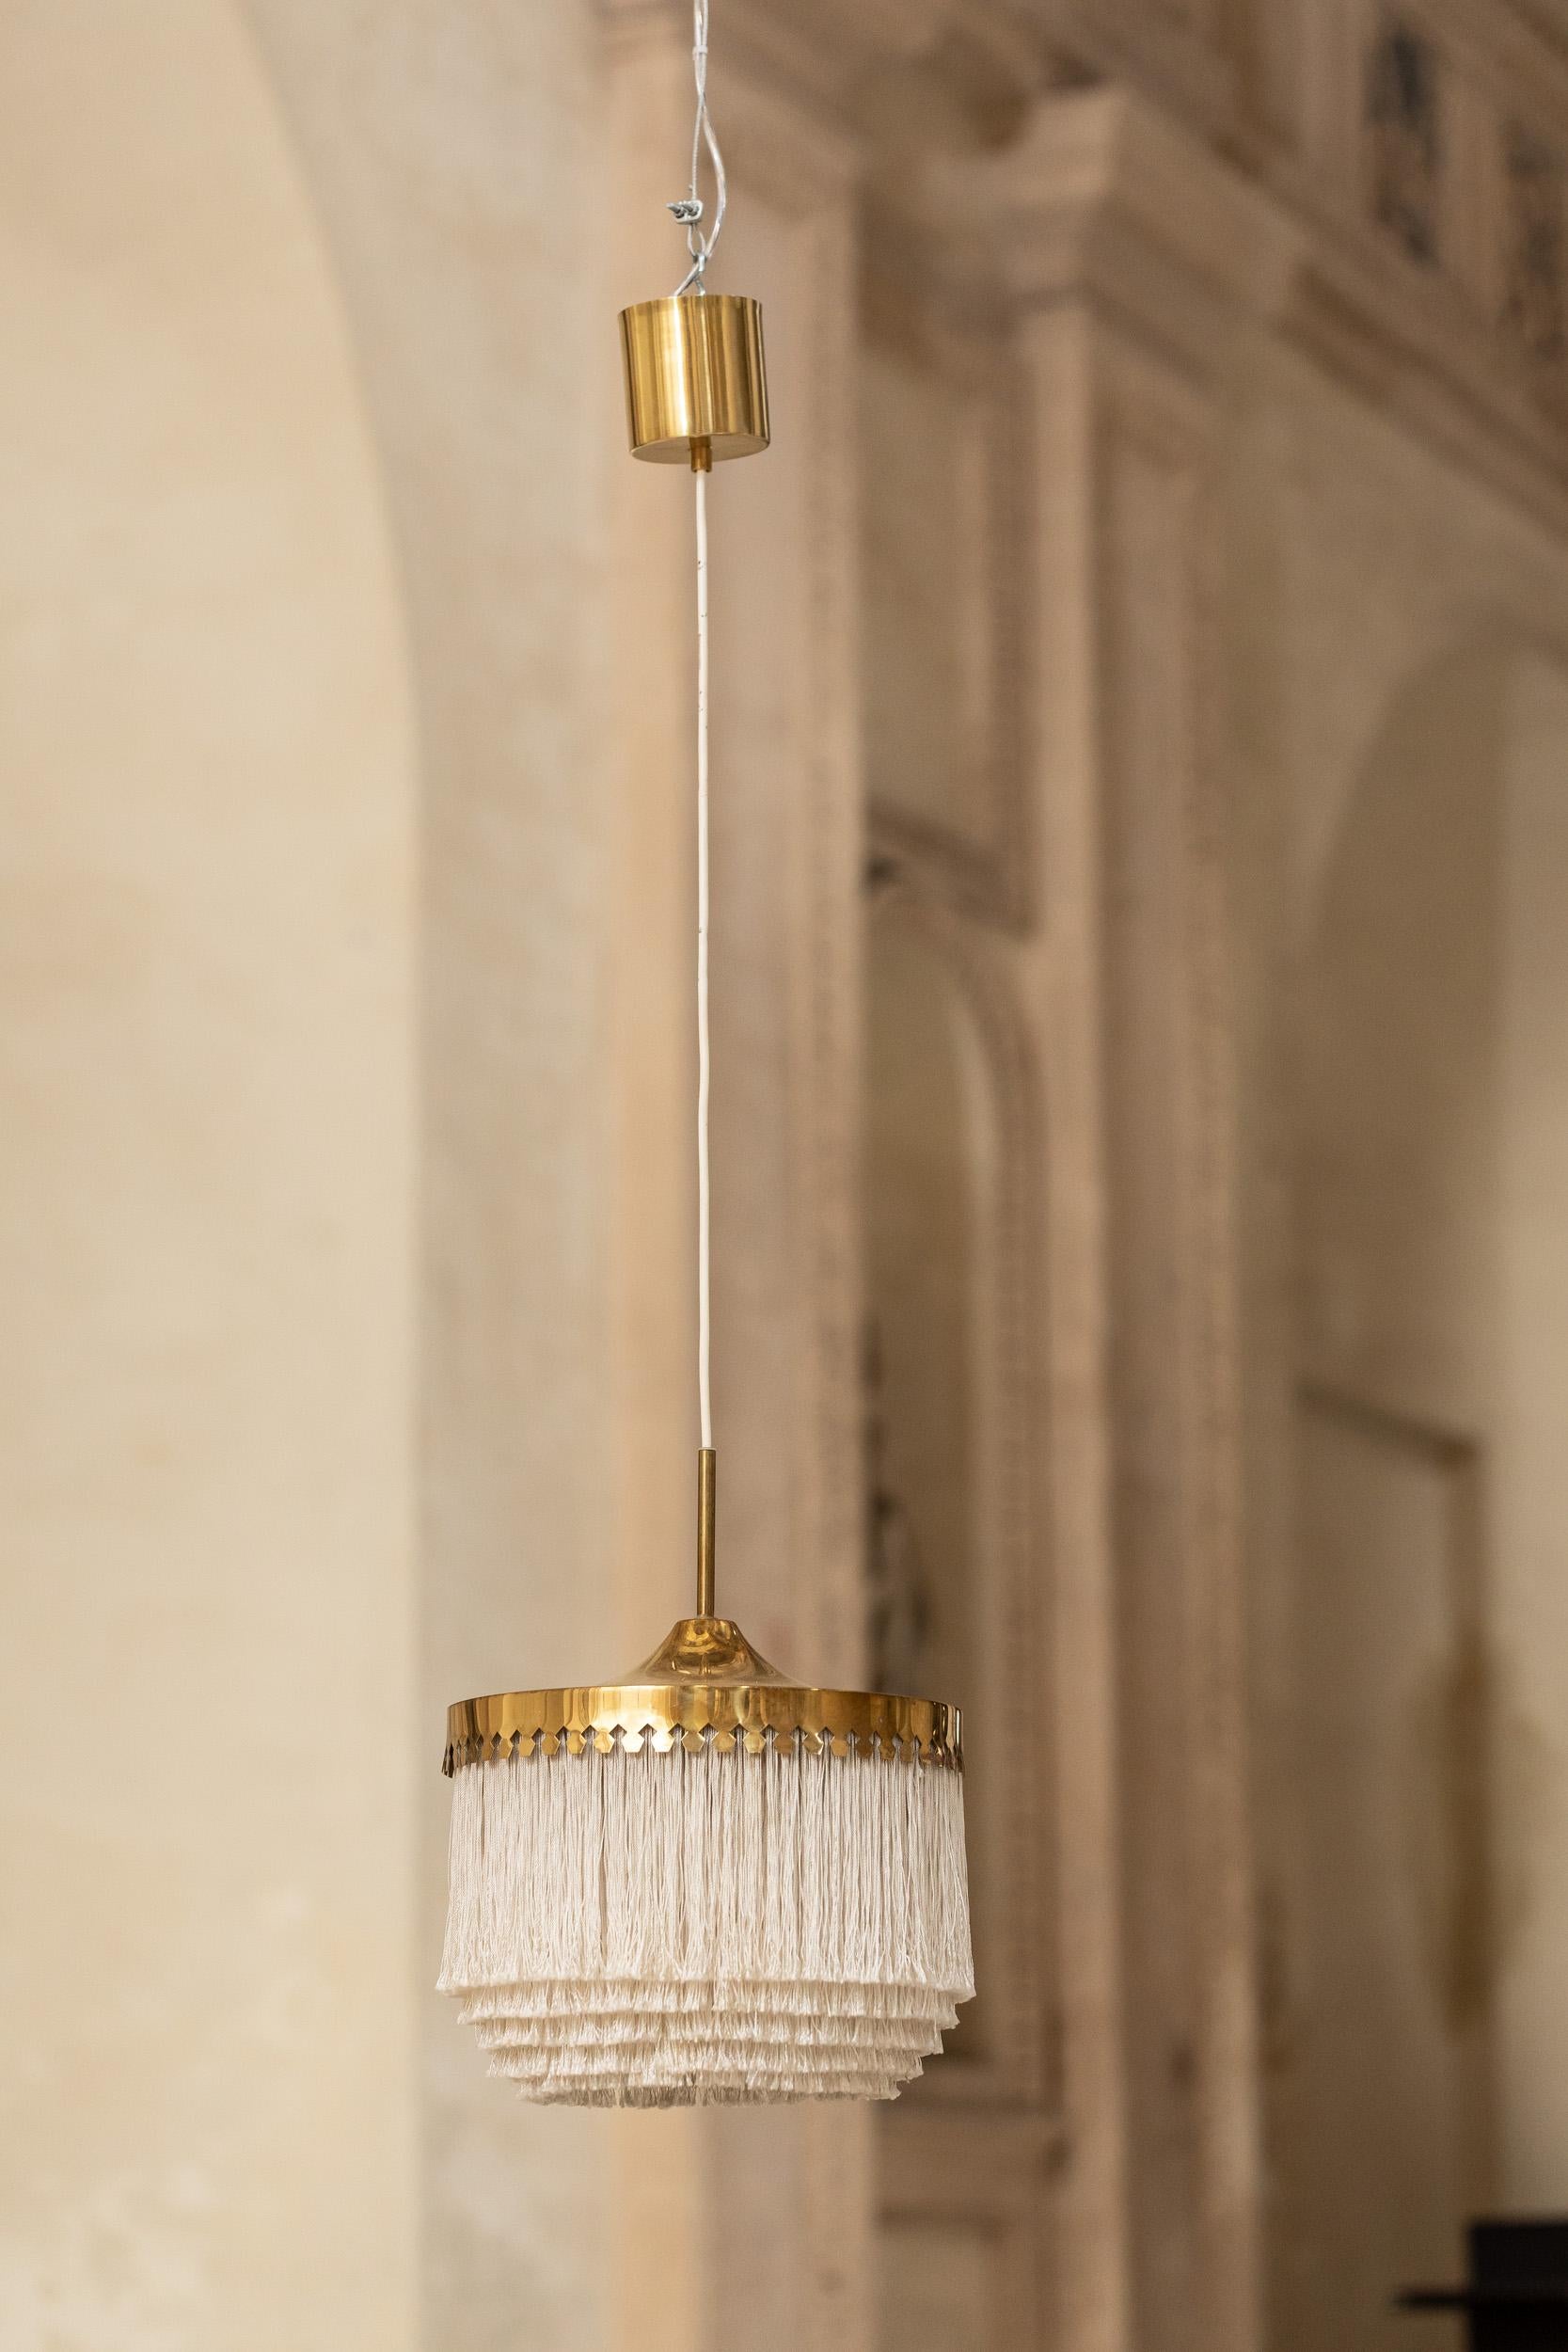 Iconic fringe pendant light by Hans Agne Jakobsson.
Beautiful fabric fringes in neutral color and gold brass decoration
